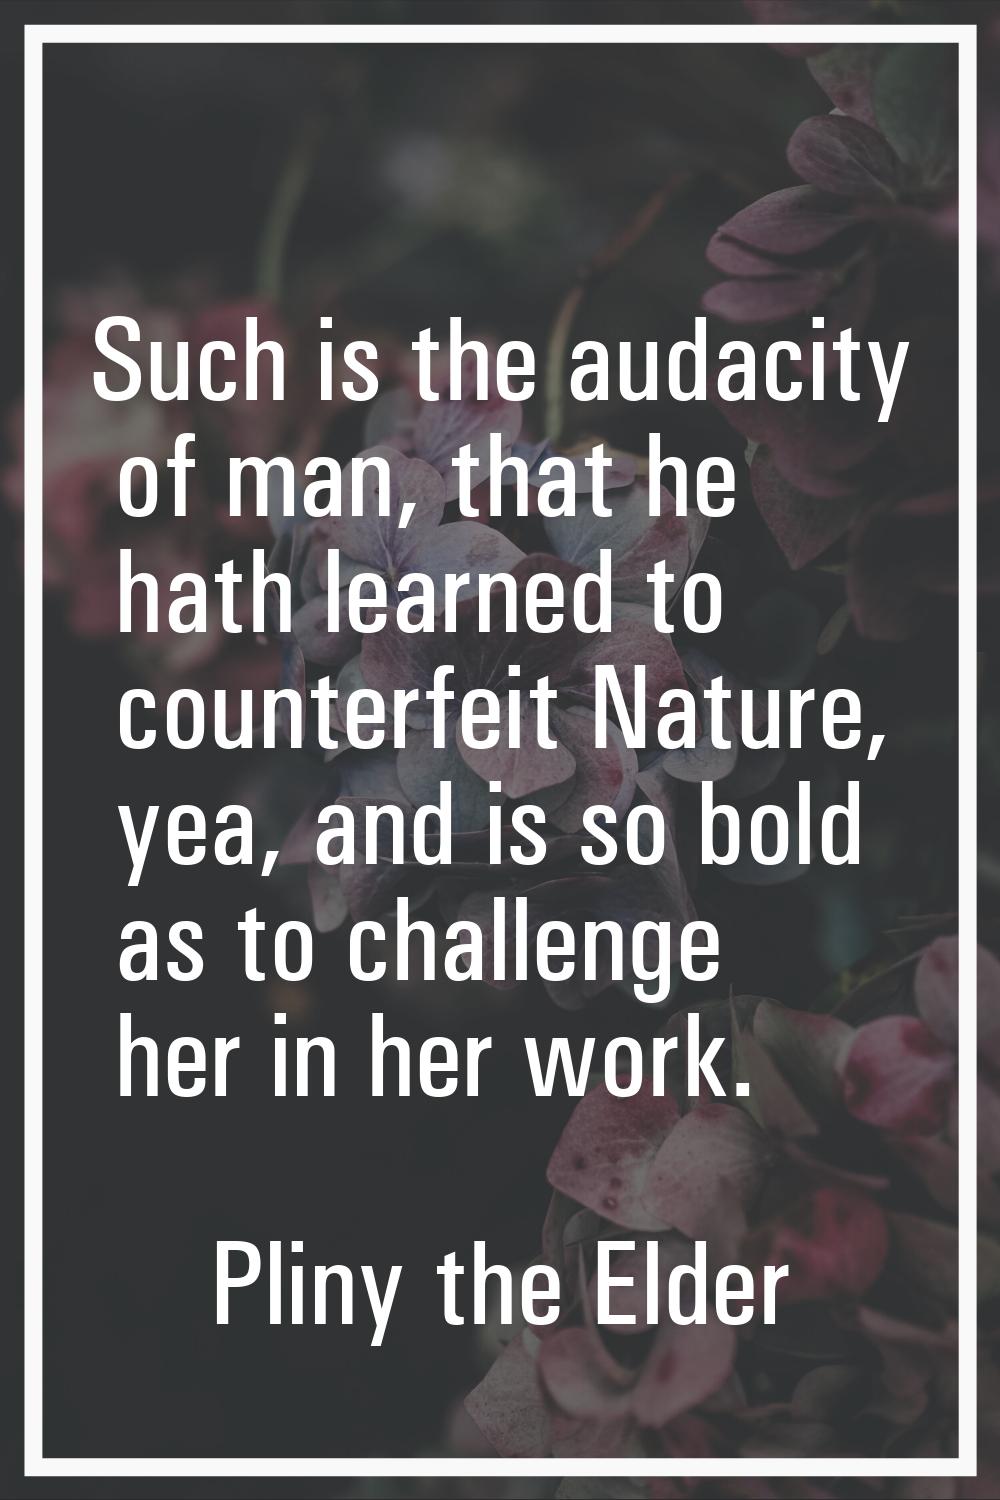 Such is the audacity of man, that he hath learned to counterfeit Nature, yea, and is so bold as to 